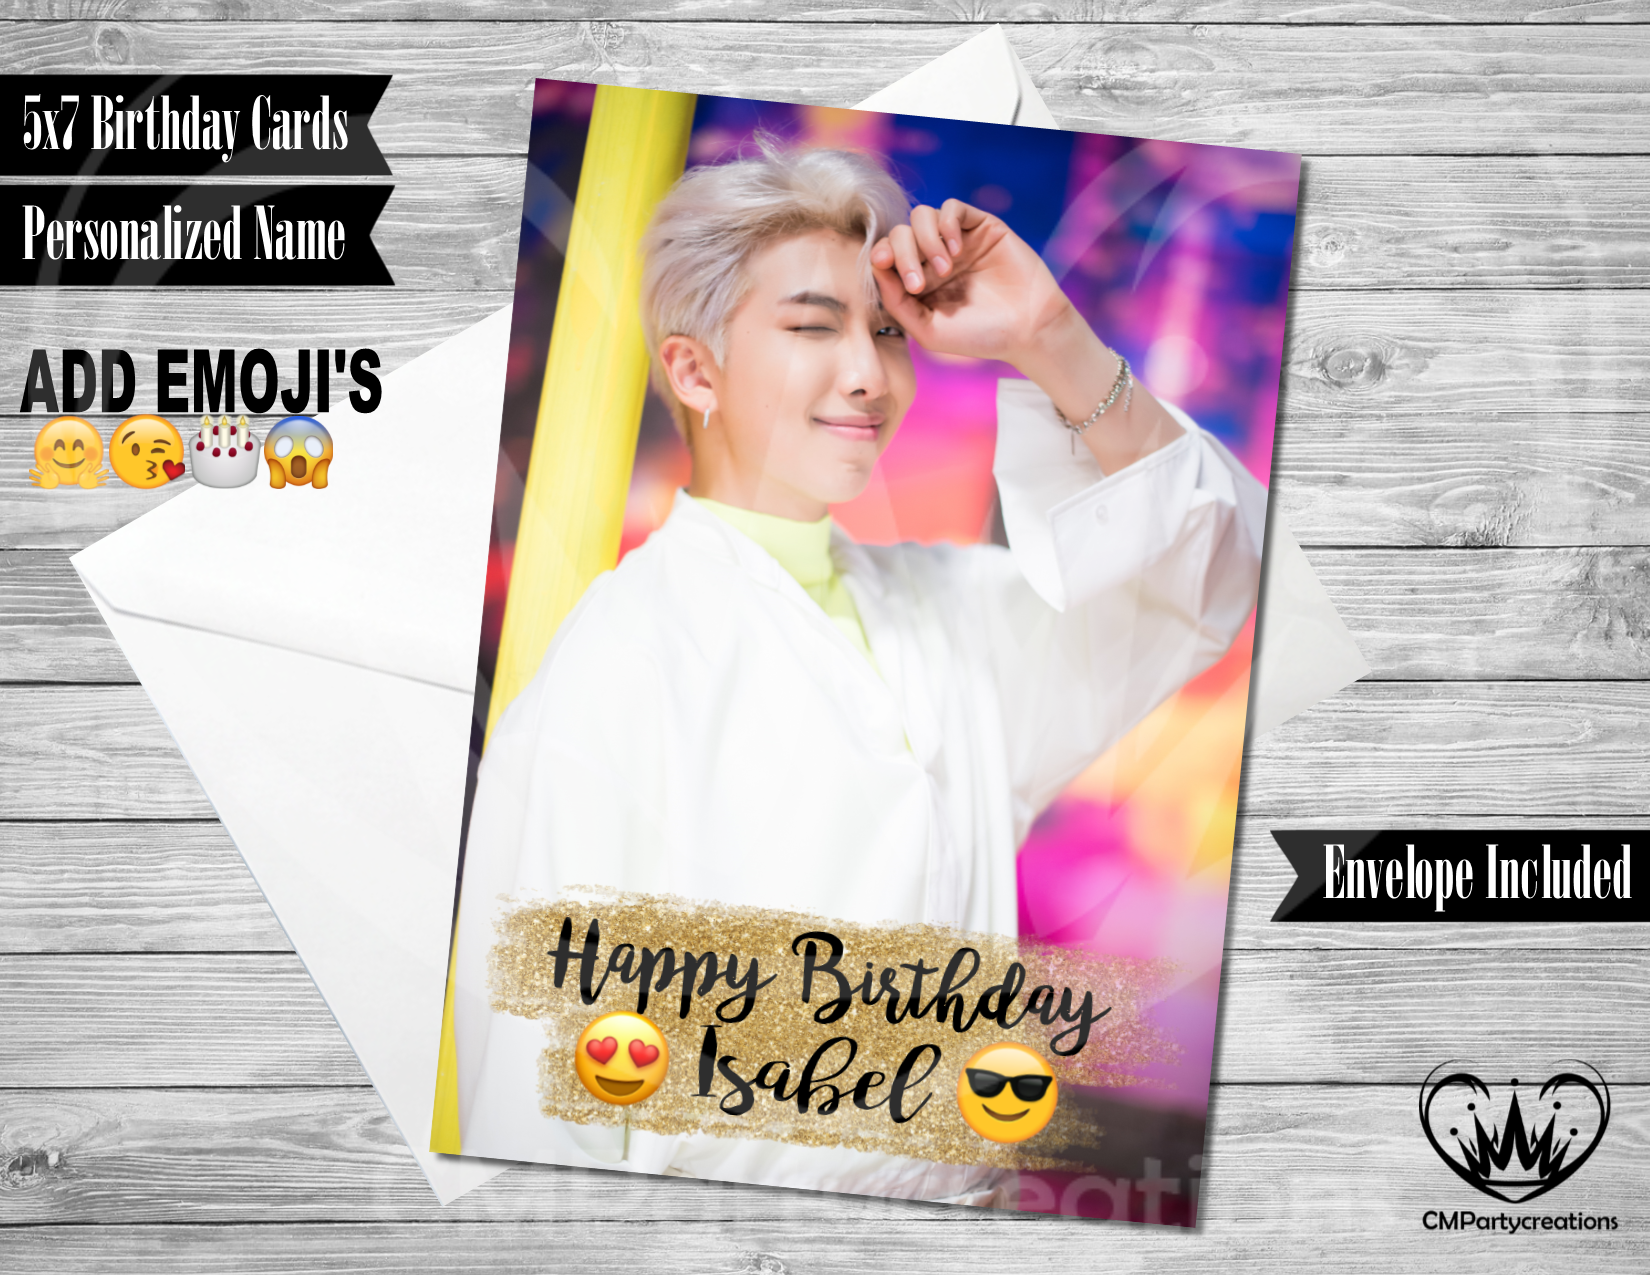 BTS RM K-Pop Personalized Birthday Card - CMPartycreations